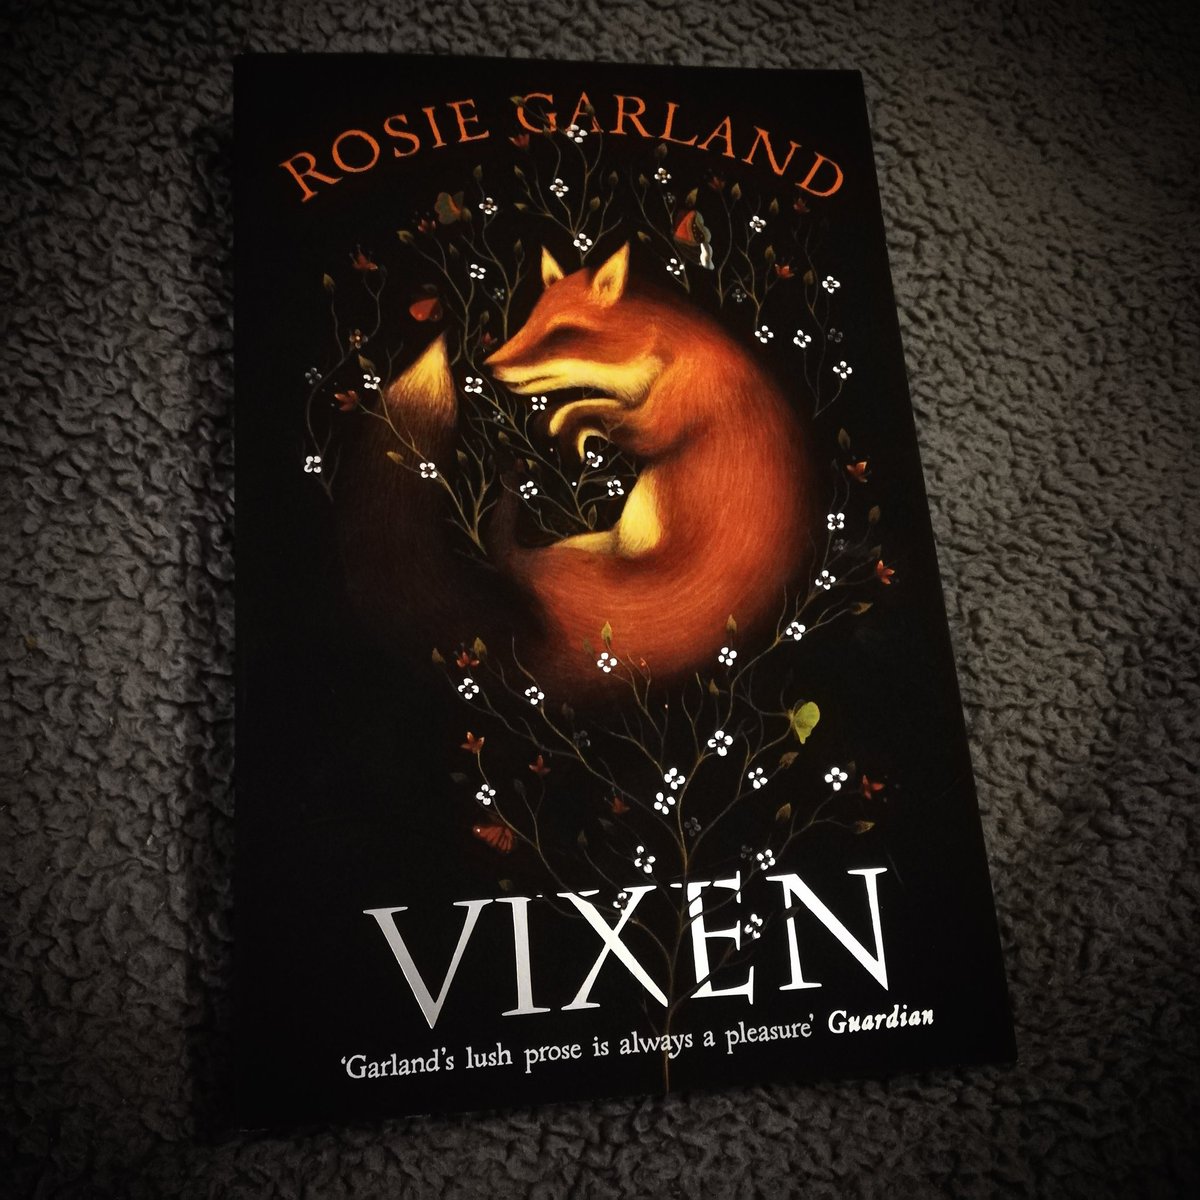 An early Christmas present from my other half 😍 #christmas #love #book #bookgift #bookish #vixen #rosiegarland #gift #presant #winter #winterread